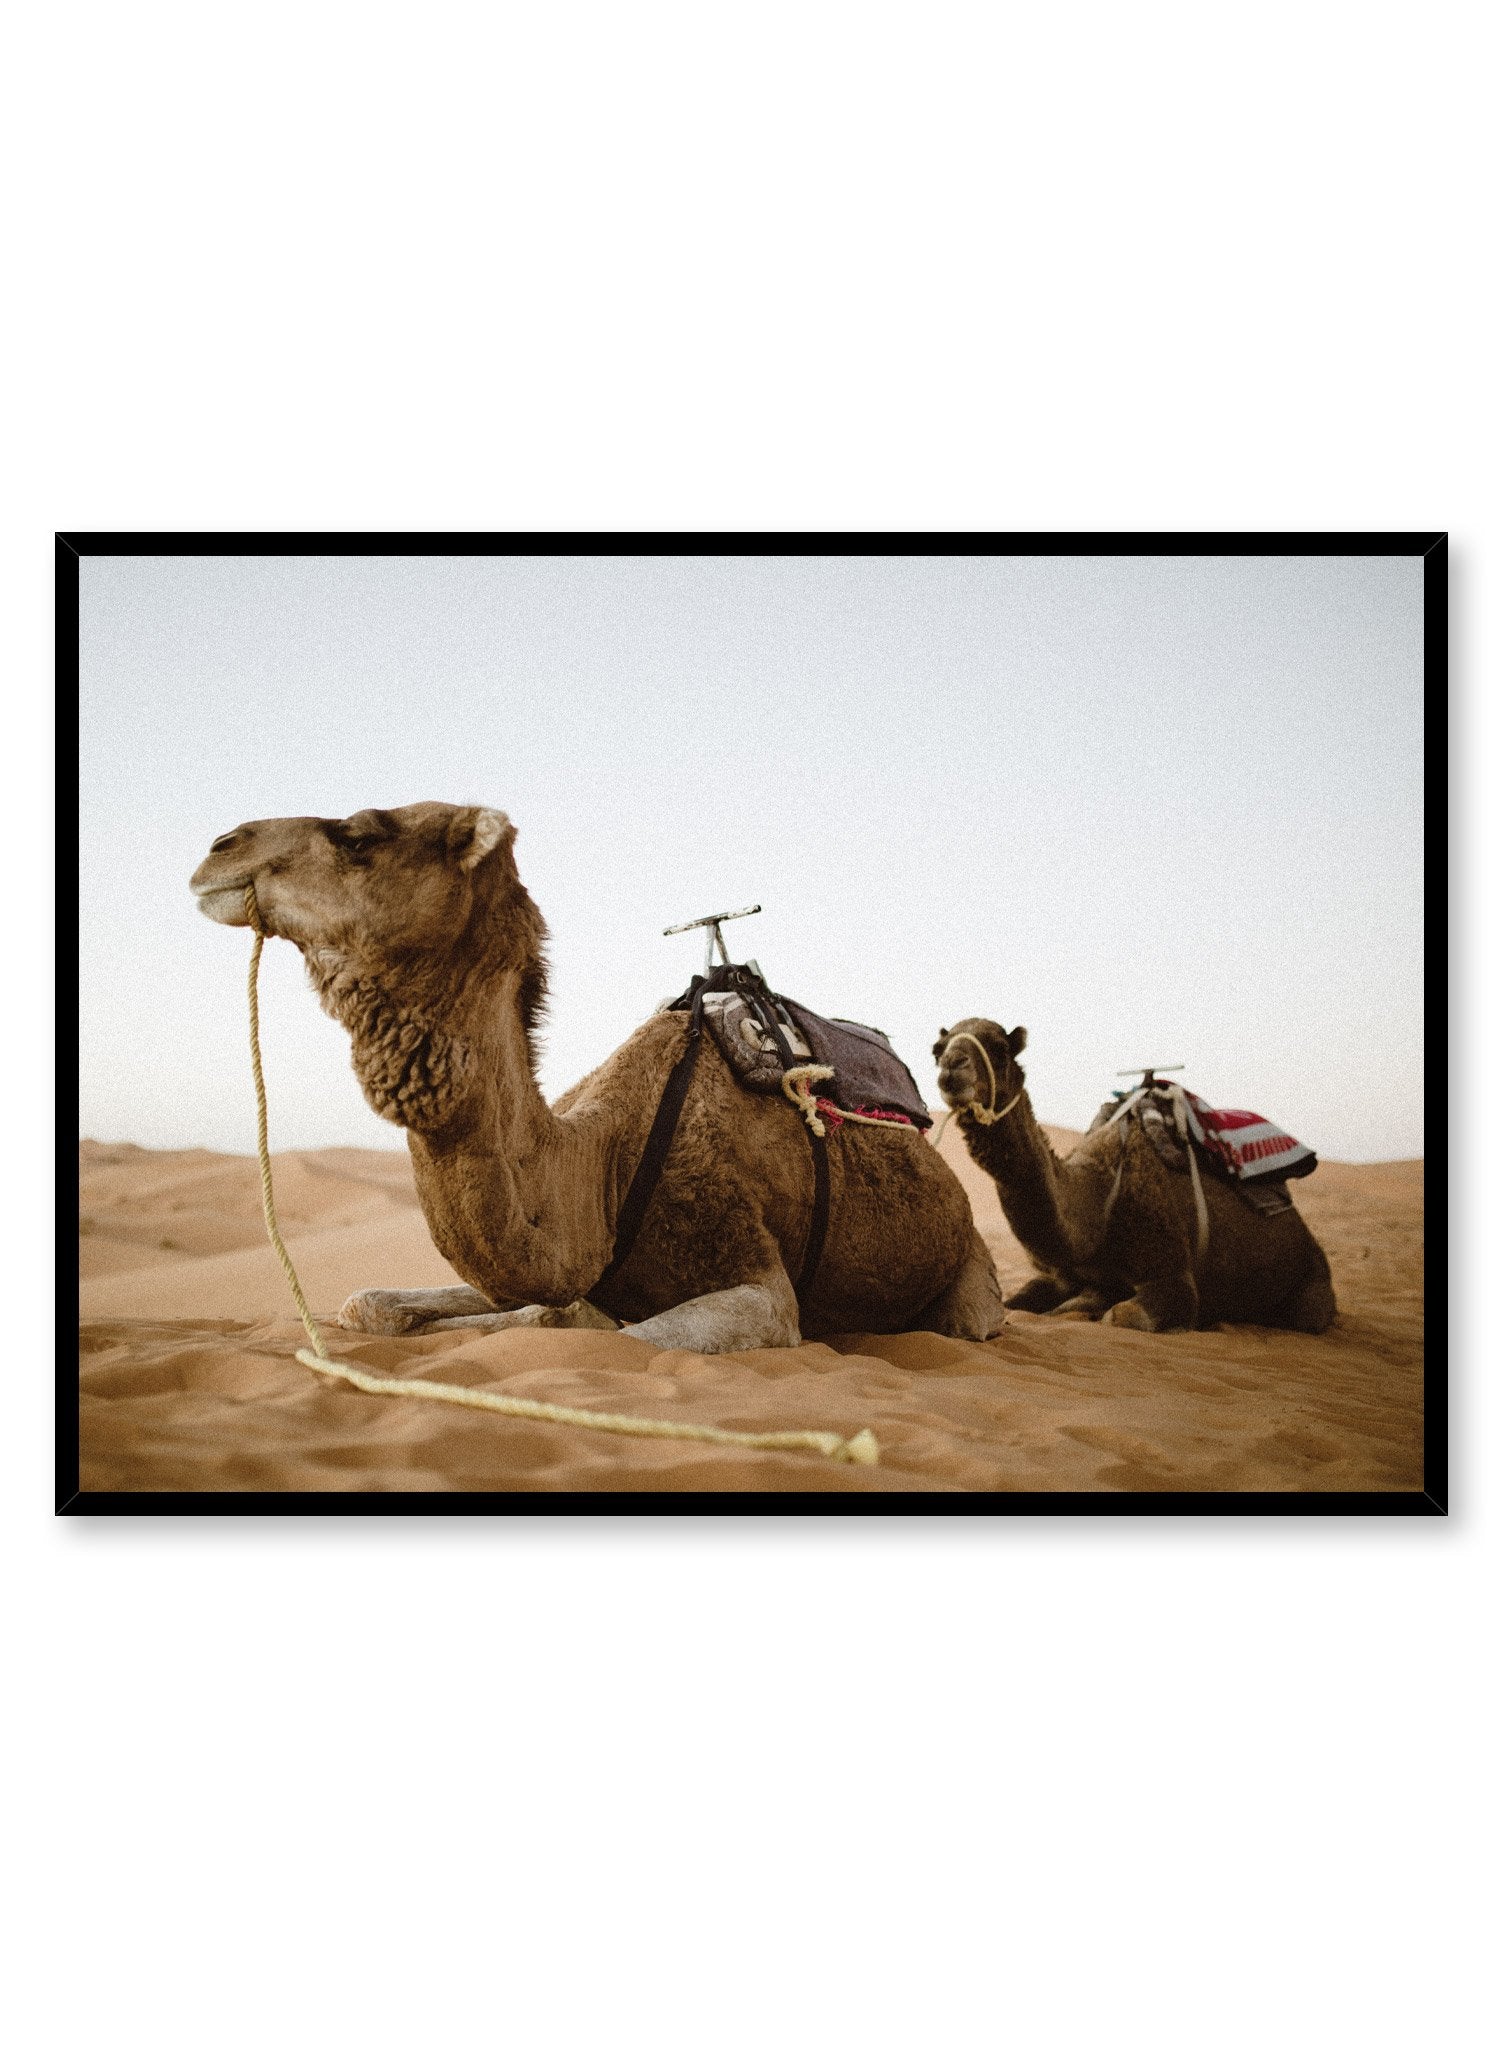 Modern nature photography poster by Opposite Wall with camels in the desert.